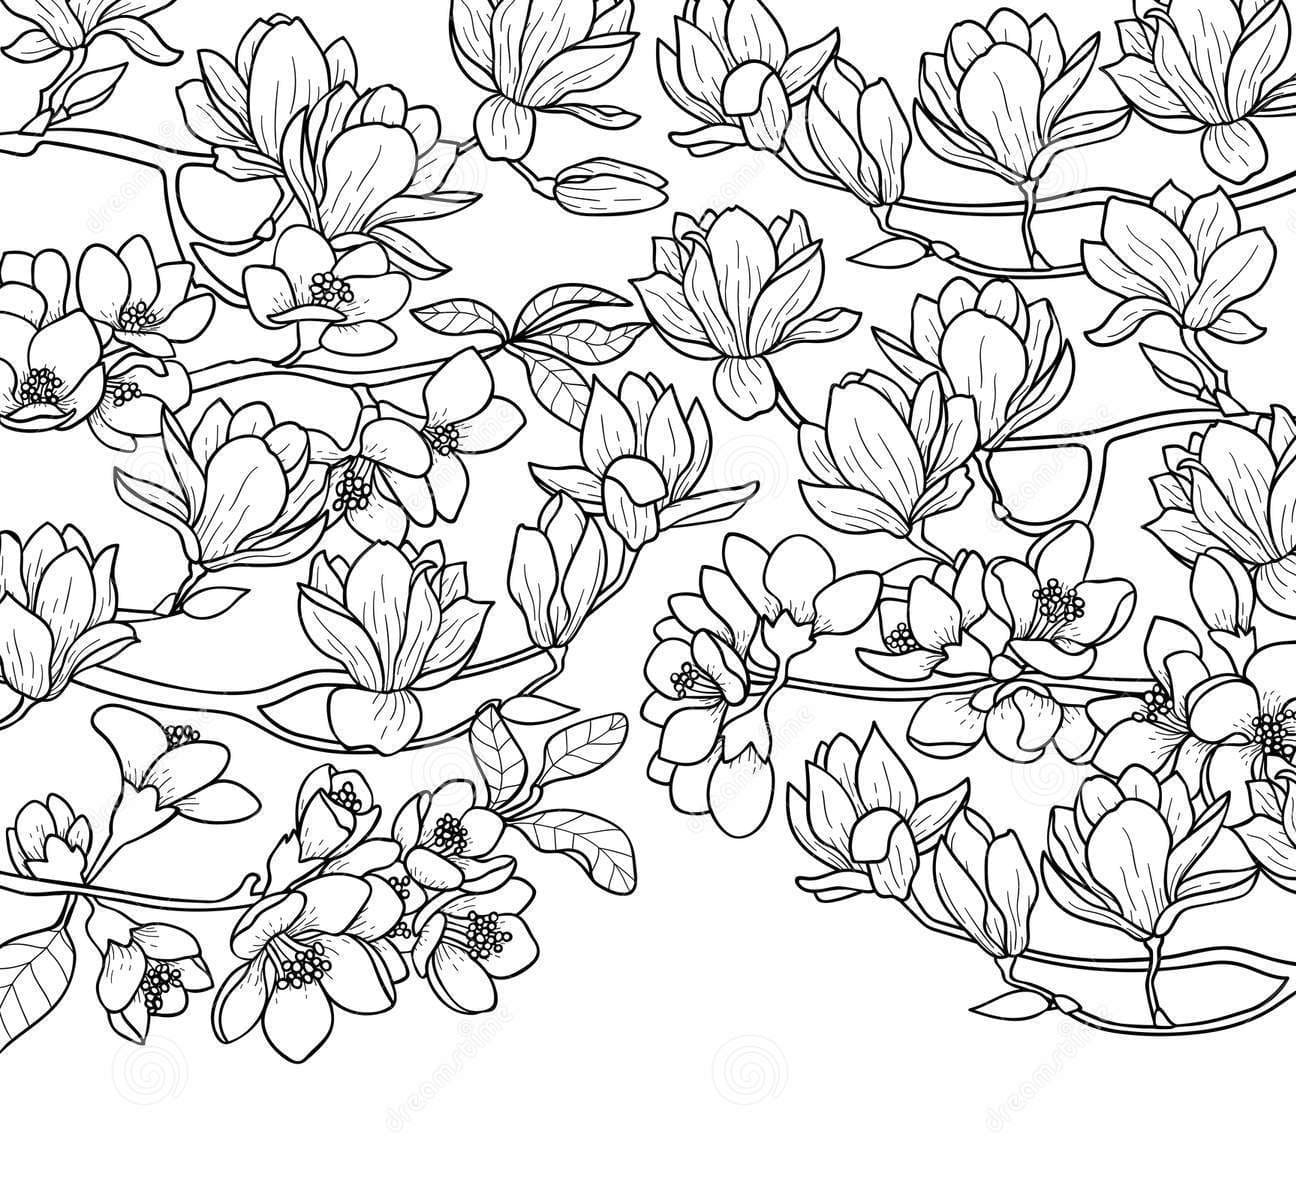 Magnolia and Cherry Spring Printable